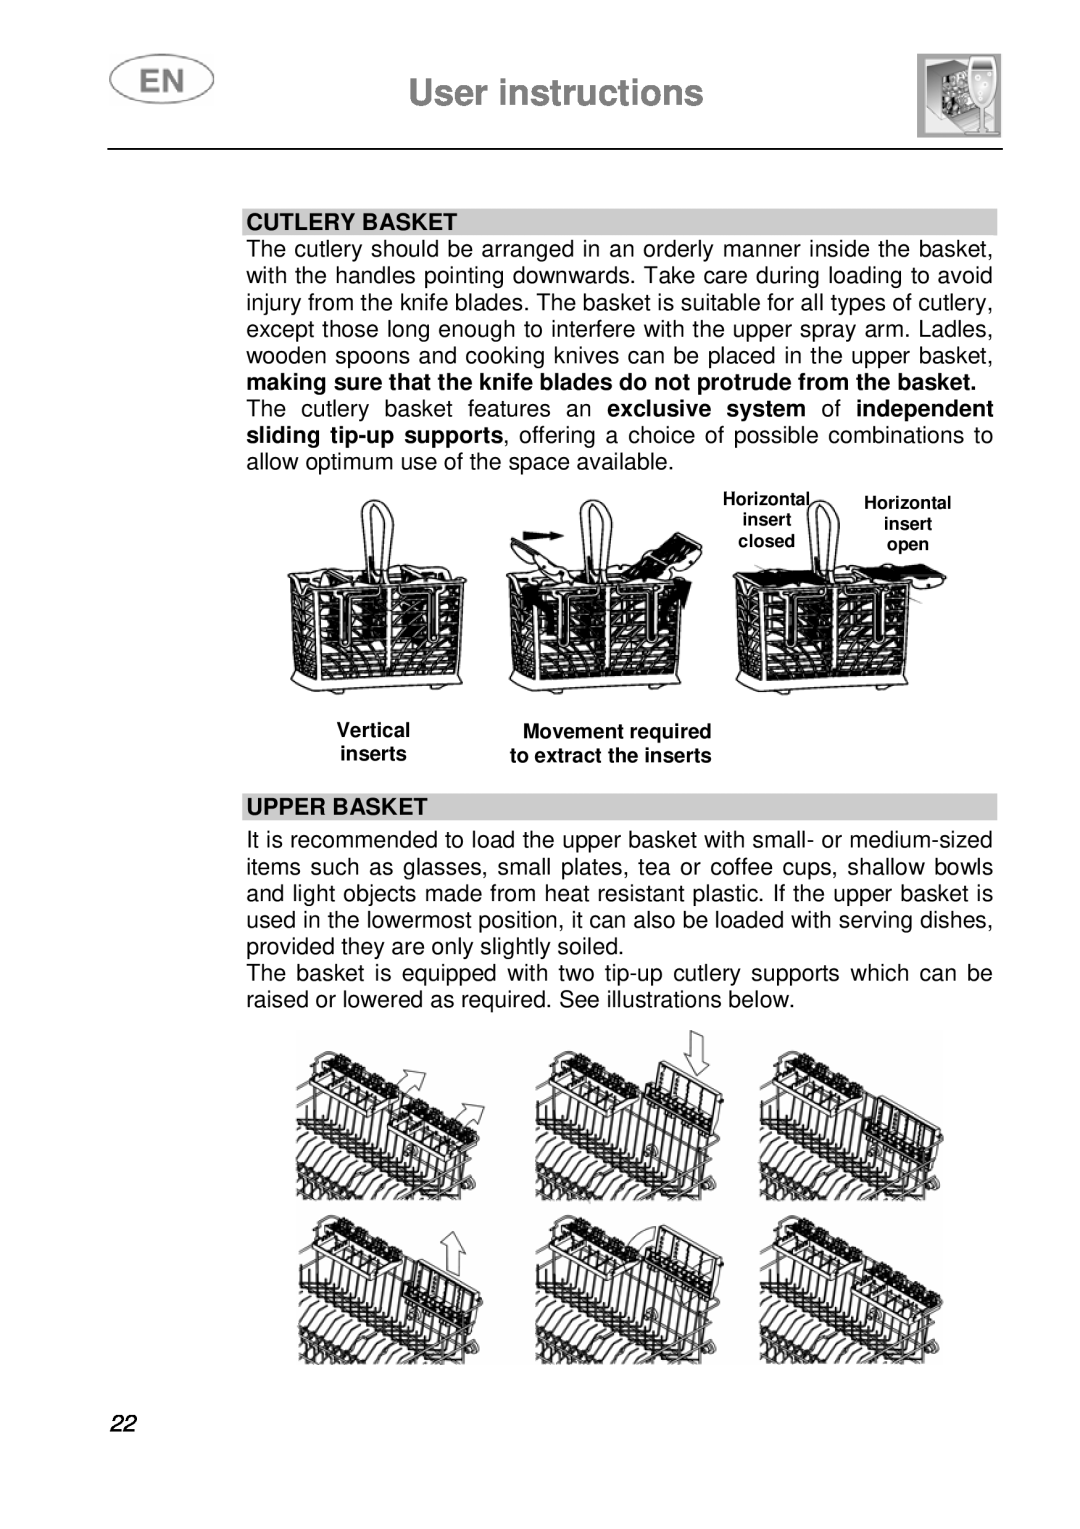 Smeg ST4108 manual User instructions, Cutlery Basket, Upper Basket, Vertical, Movement required, to extract the inserts 